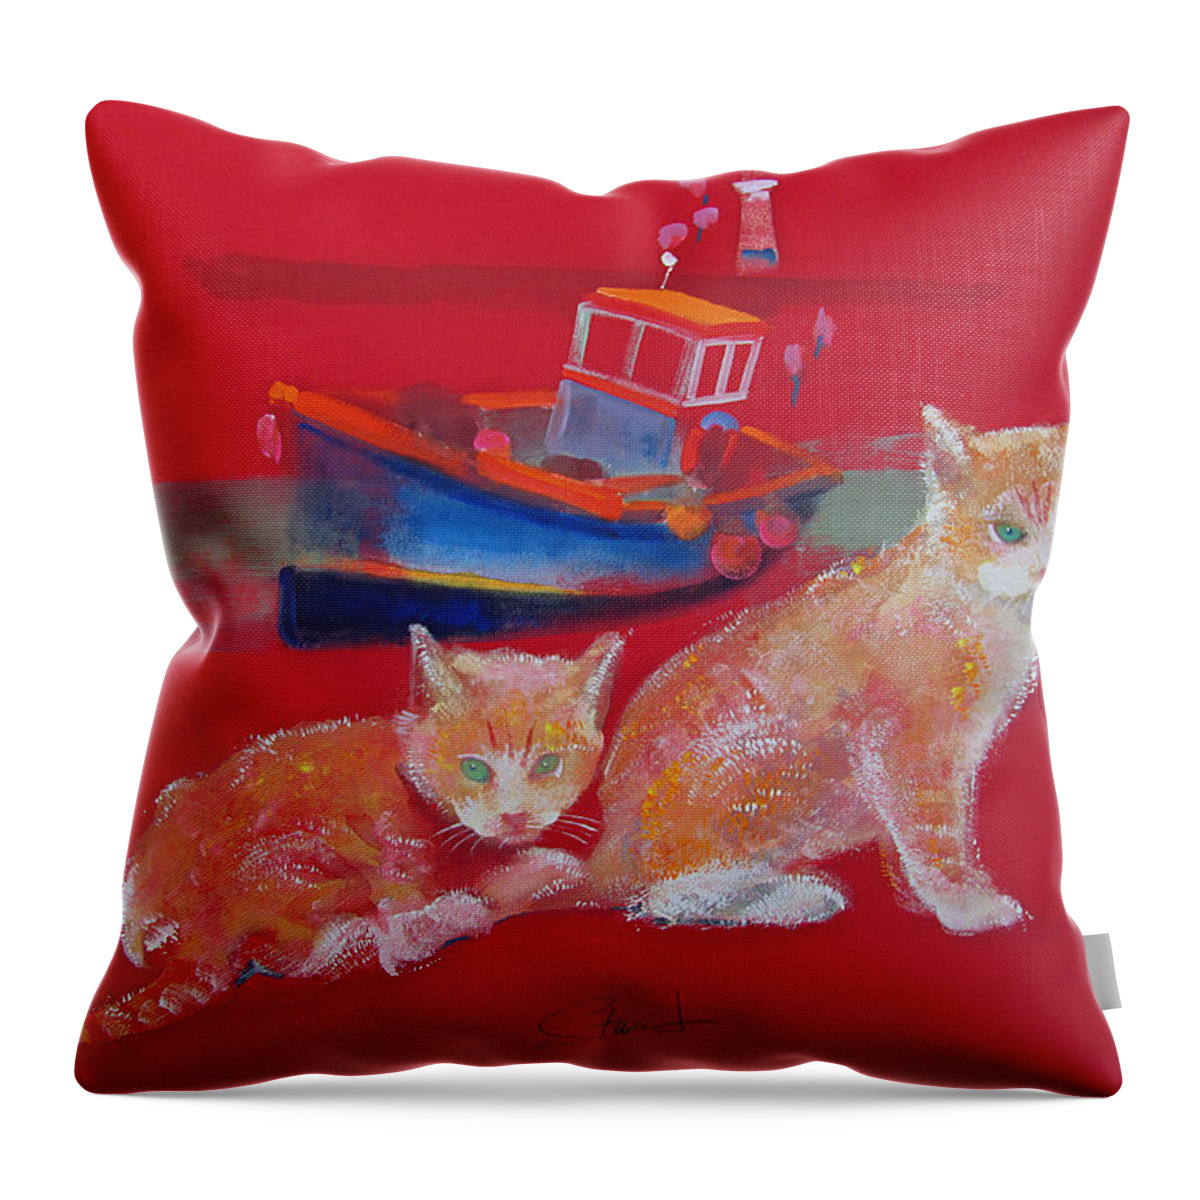 Kittens Throw Pillow featuring the painting Kittens With Boat by Charles Stuart